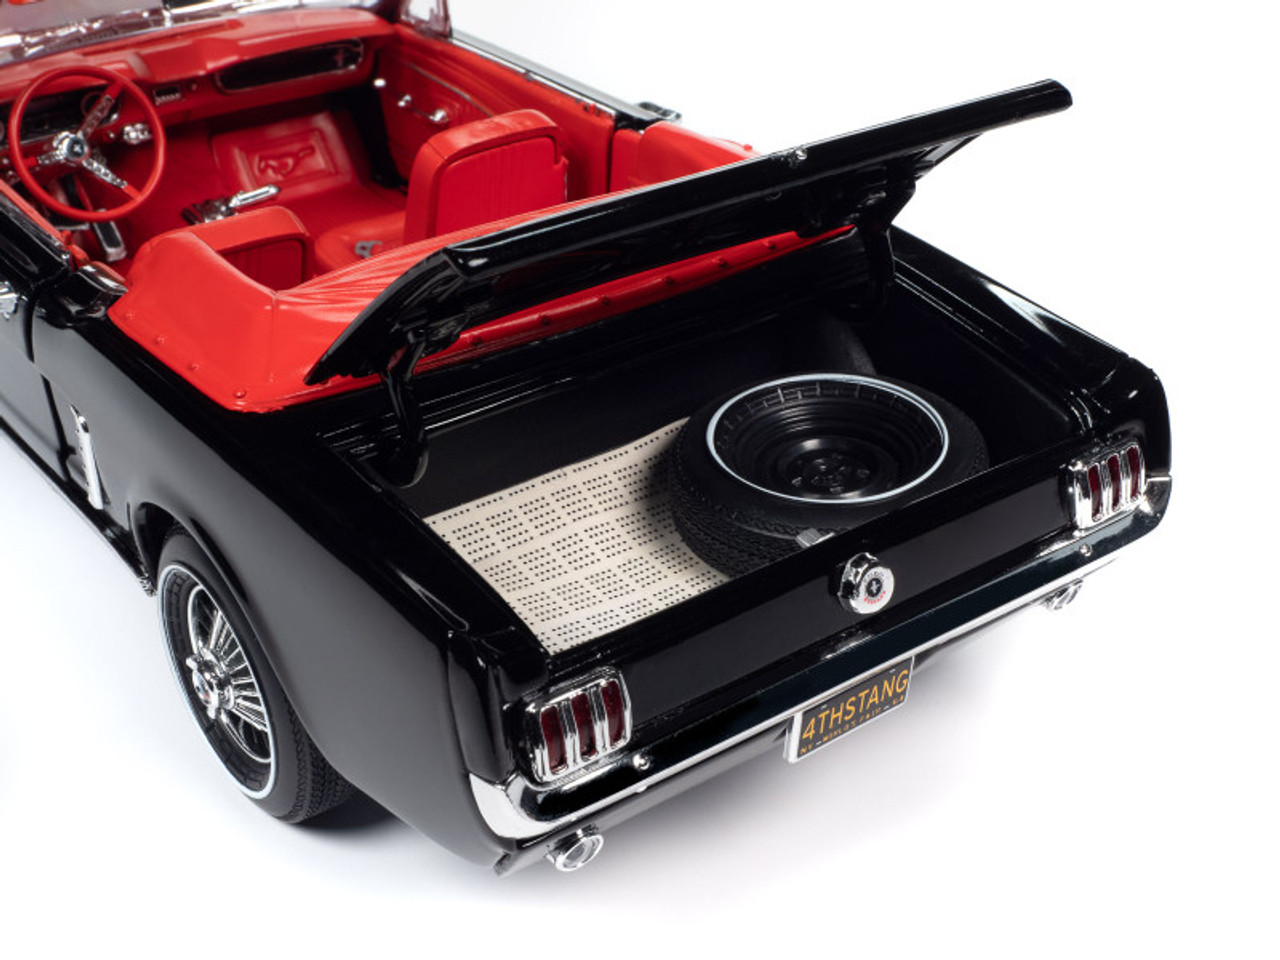 1964 1/2 Ford Mustang Convertible Raven Black with Red Interior "American Muscle" Series 1/18 Diecast Model Car by Auto World